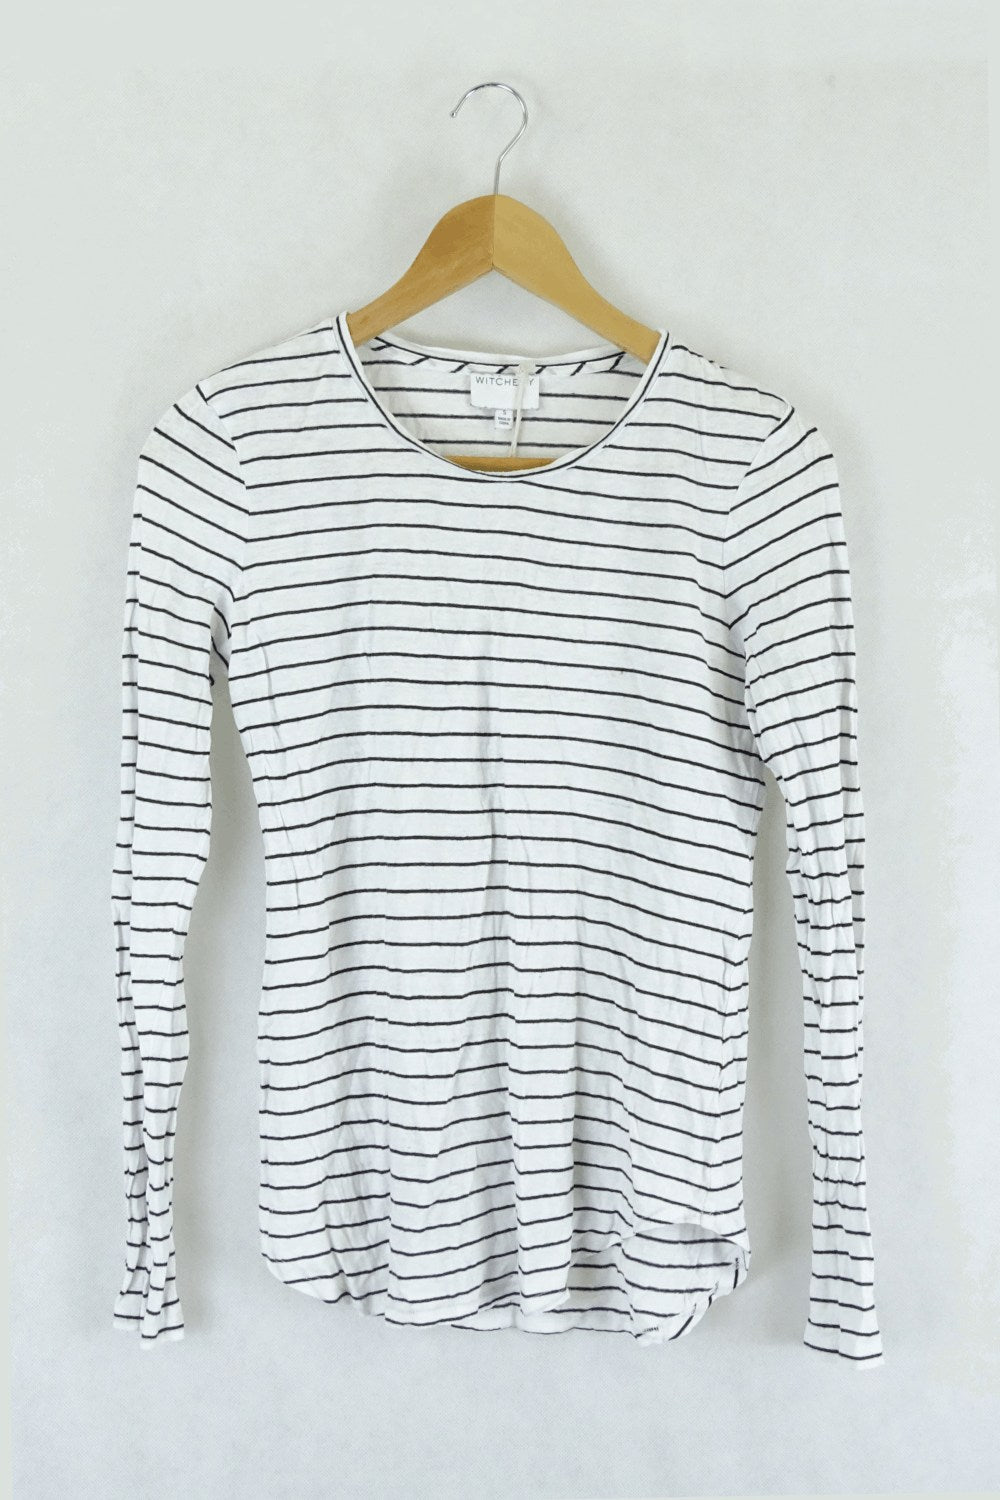 Witchery black and white striped top S